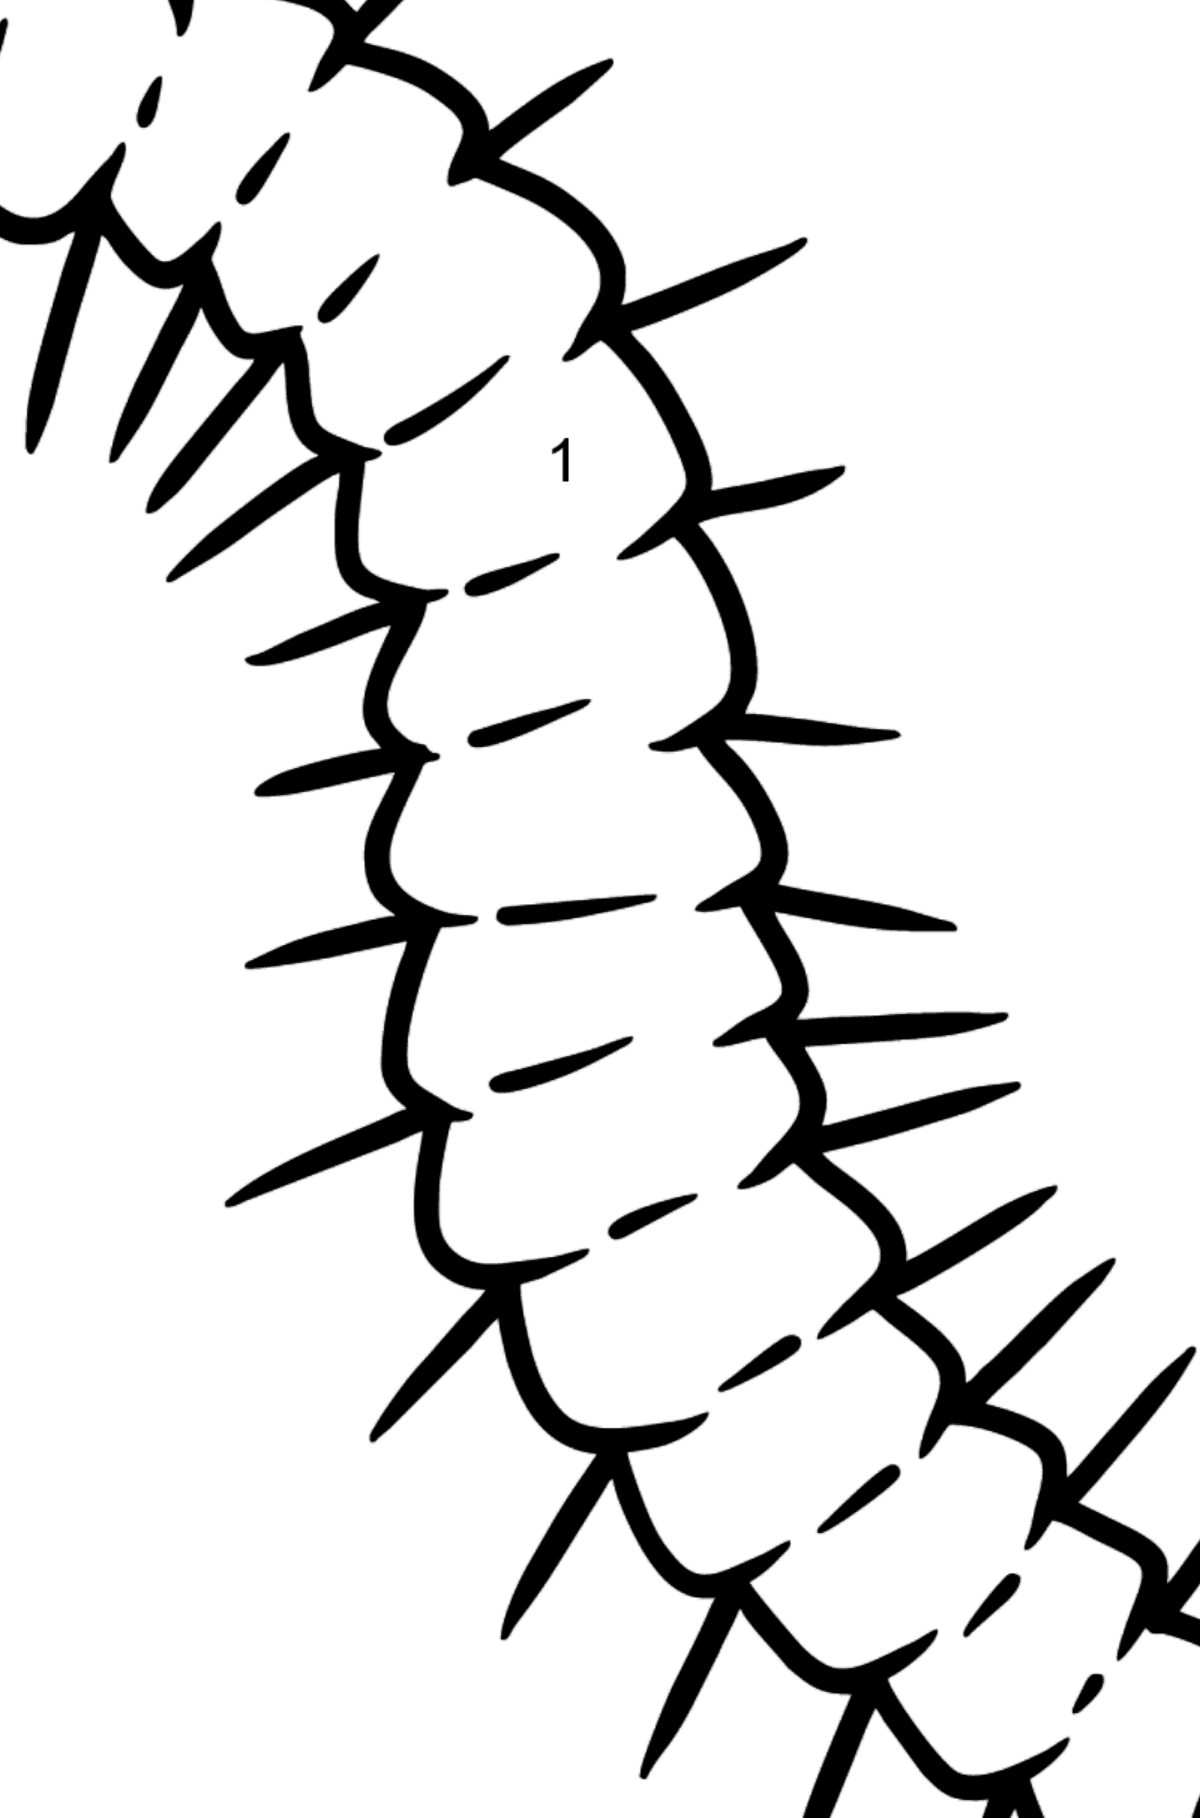 Centipede coloring page - Coloring by Numbers for Kids